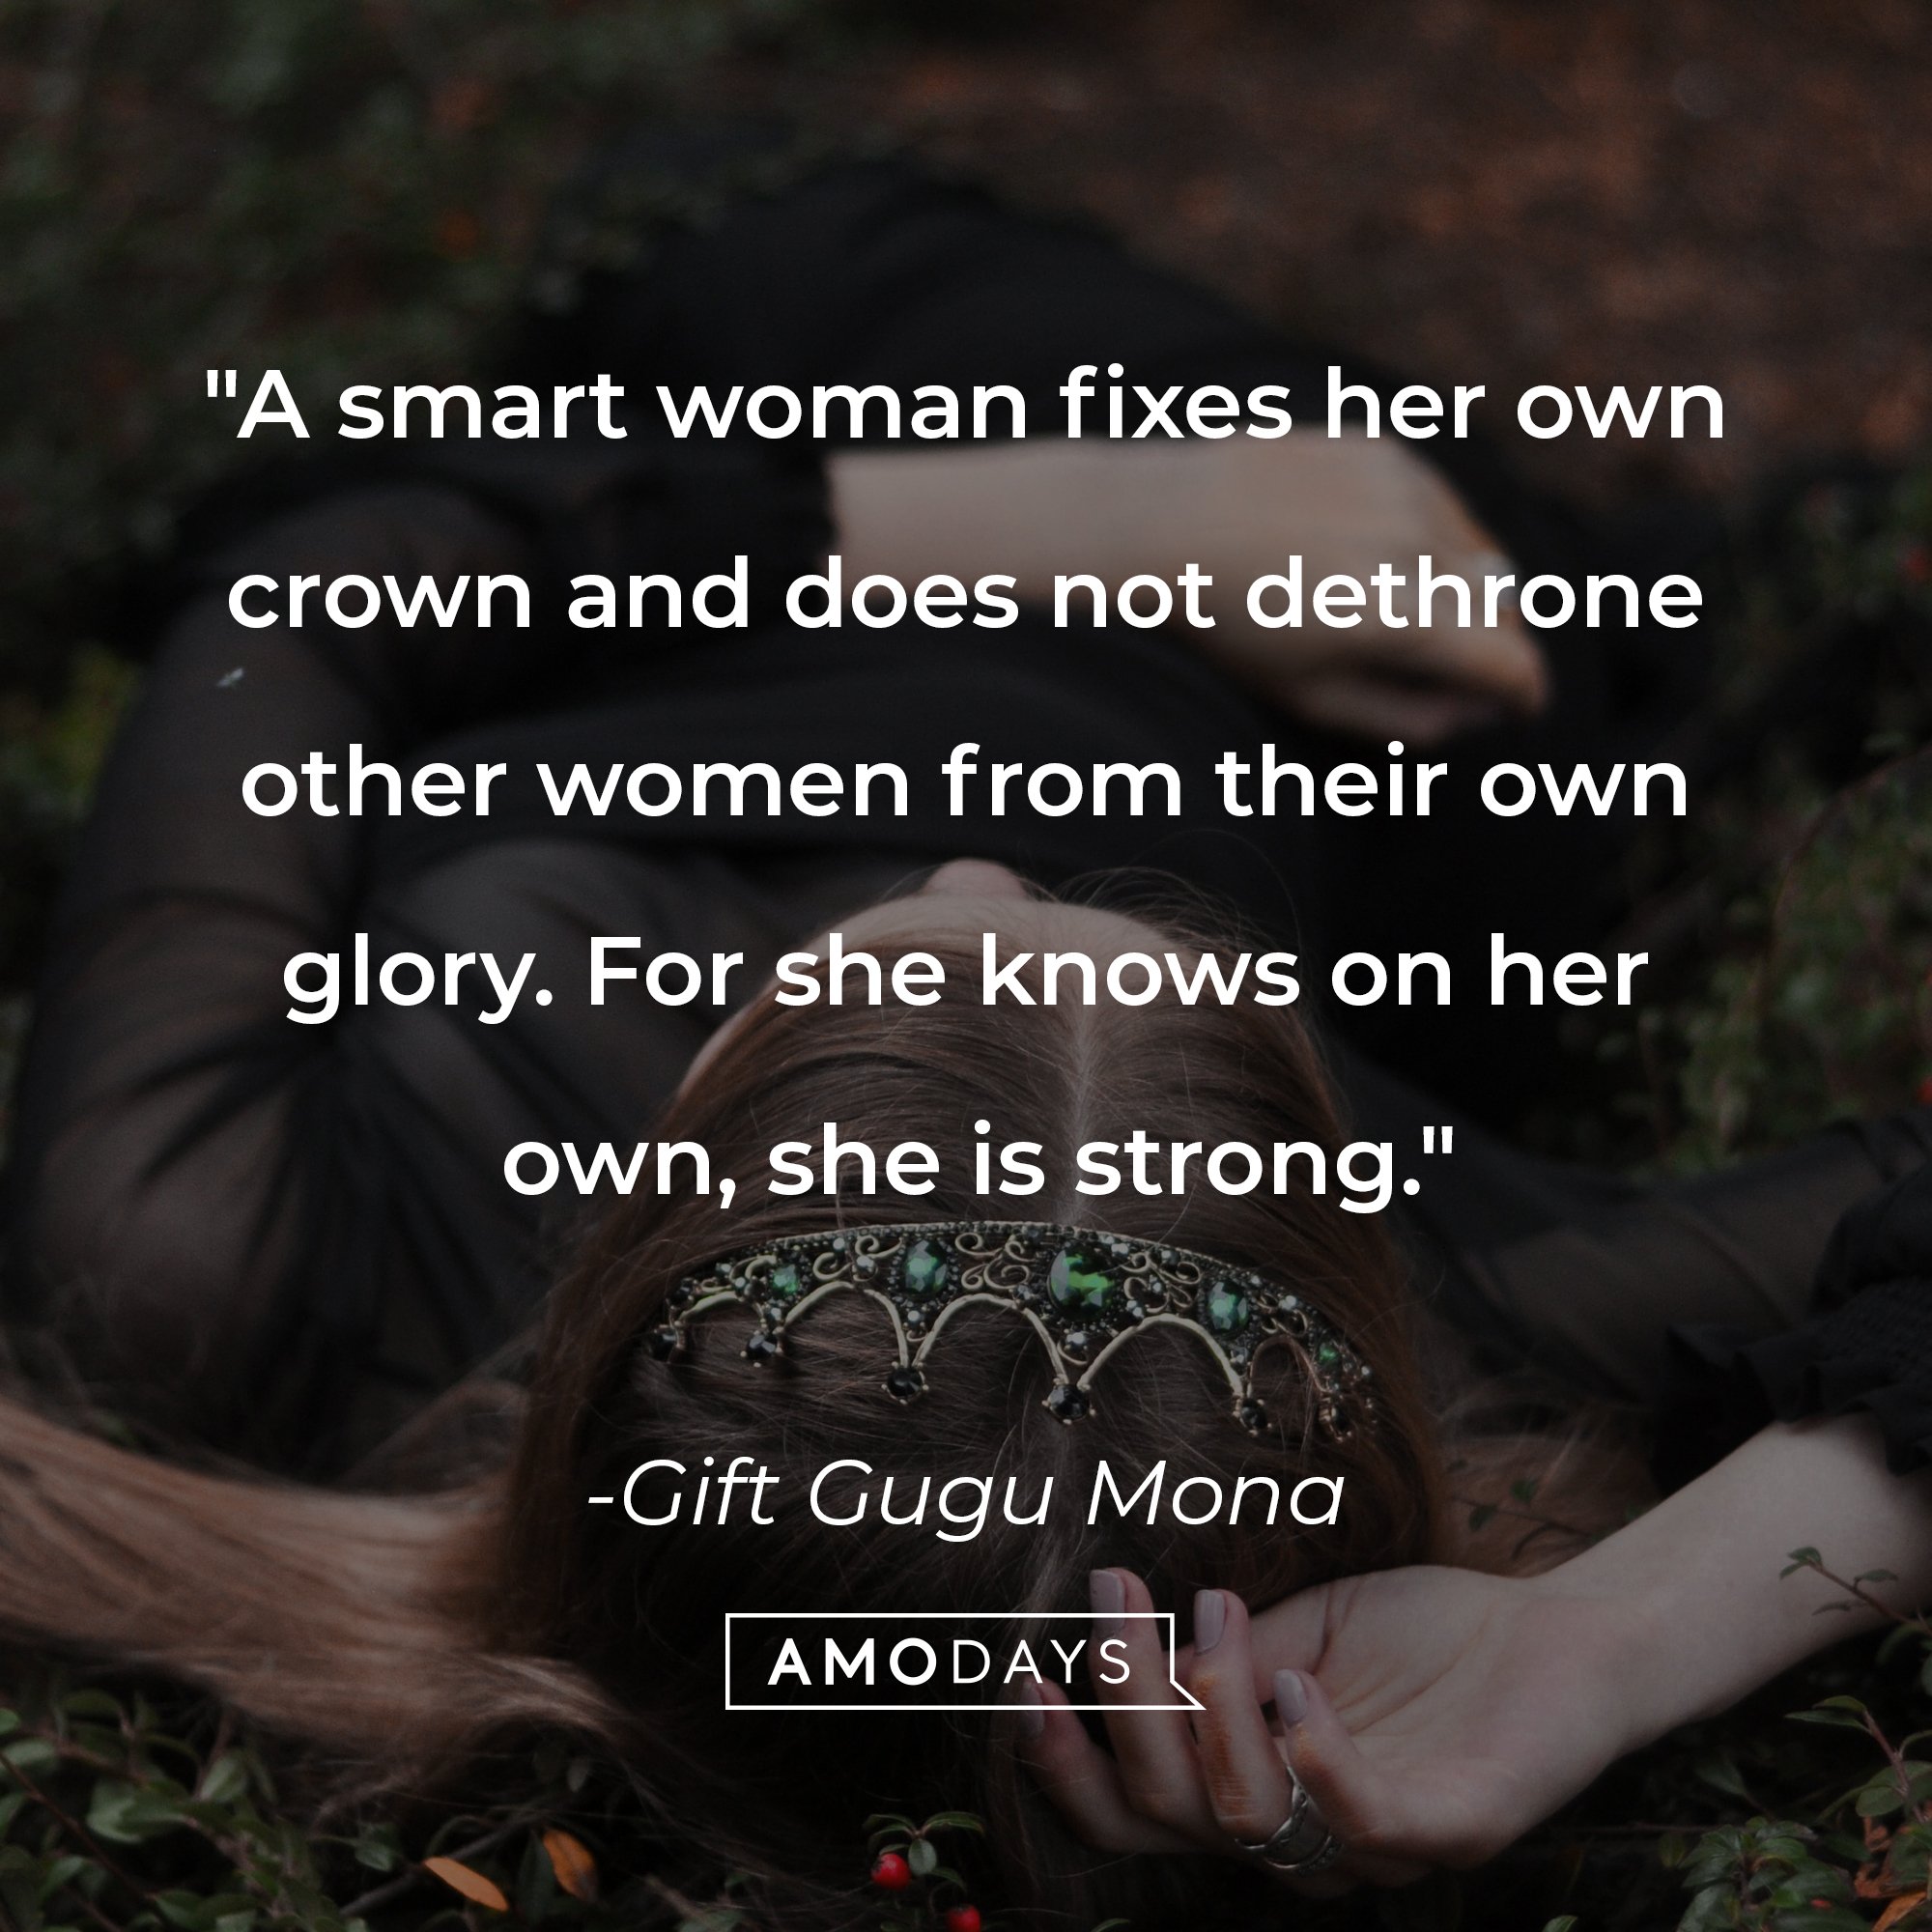 Gift Gugu Mona's quote: "A smart woman fixes her own crown and does not dethrone other women from their own glory. For she knows on her own, she is strong." | Image: AmoDays